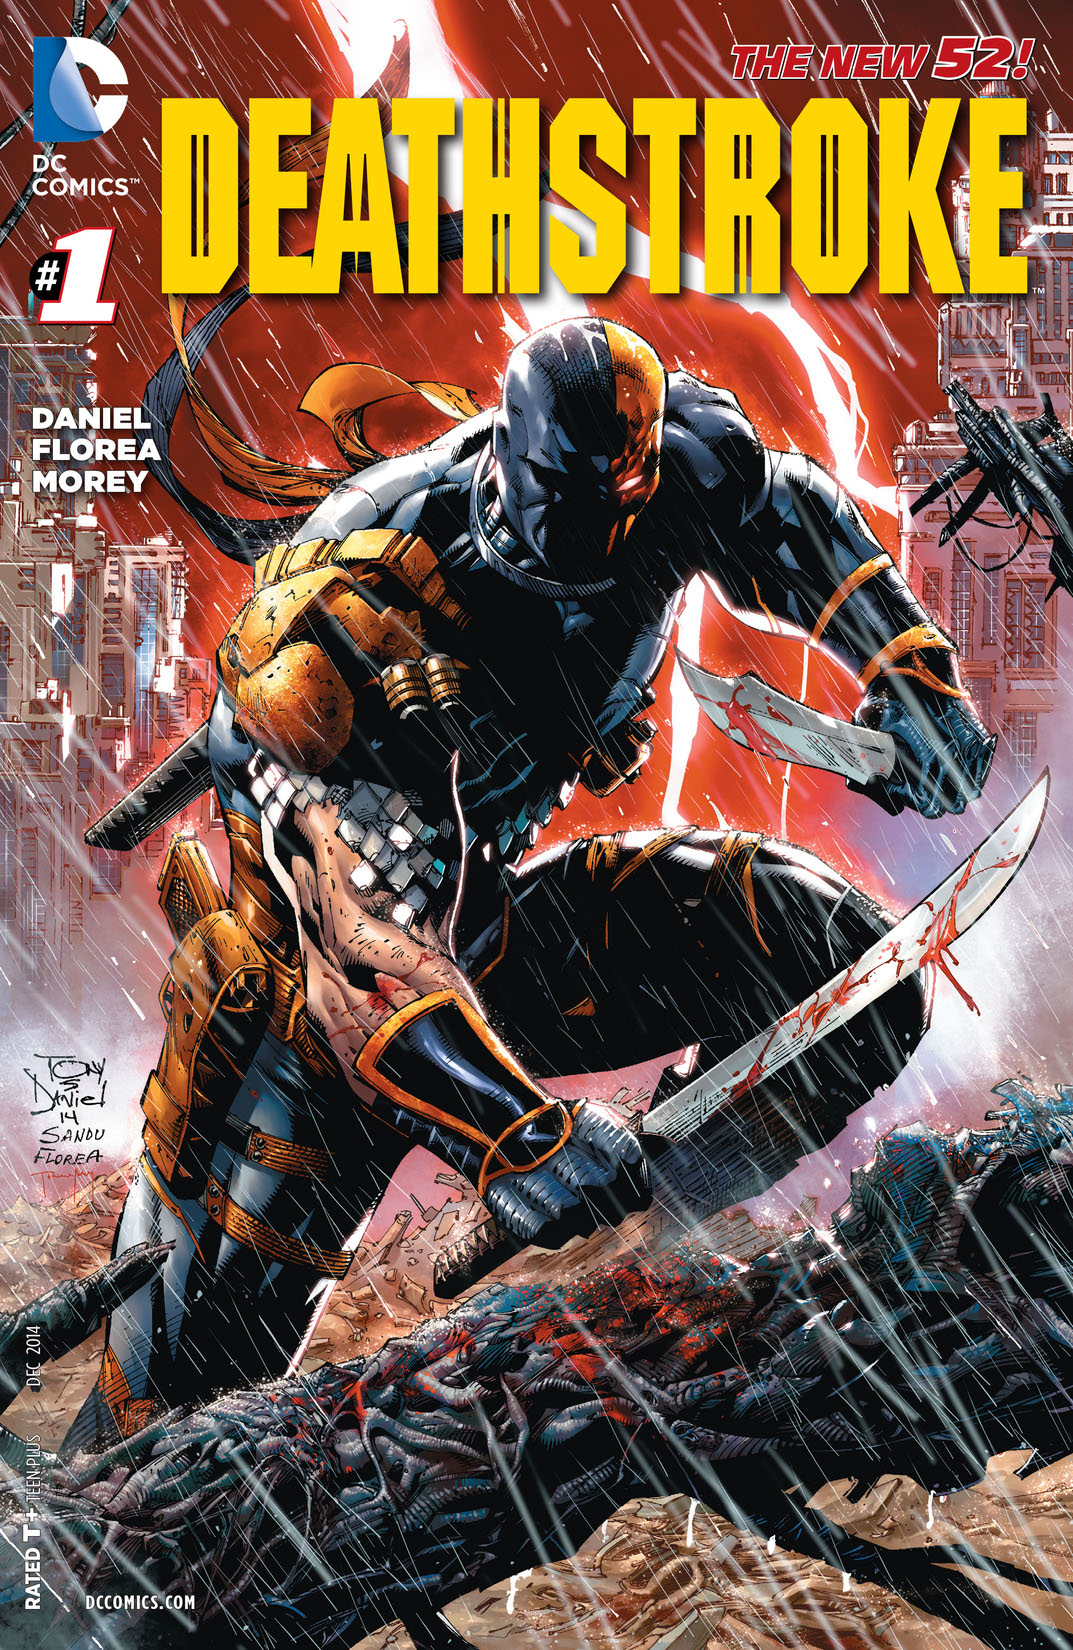 Deathstroke (2014-) #1 preview images